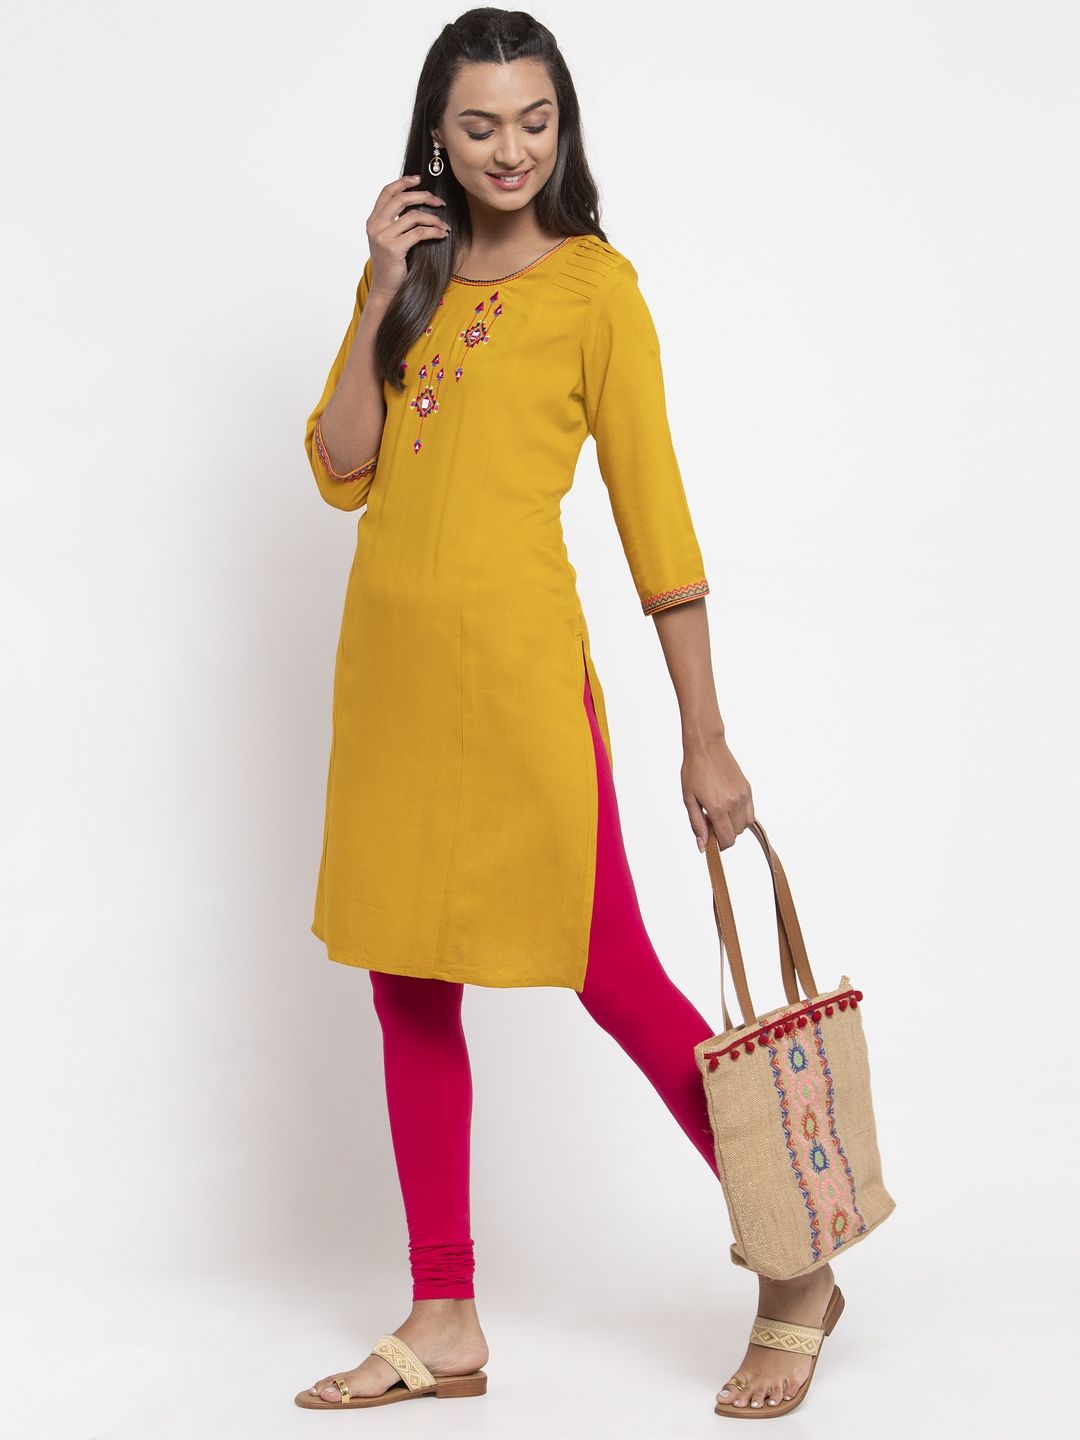 Details more than 78 leggings with yellow kurti best  thtantai2